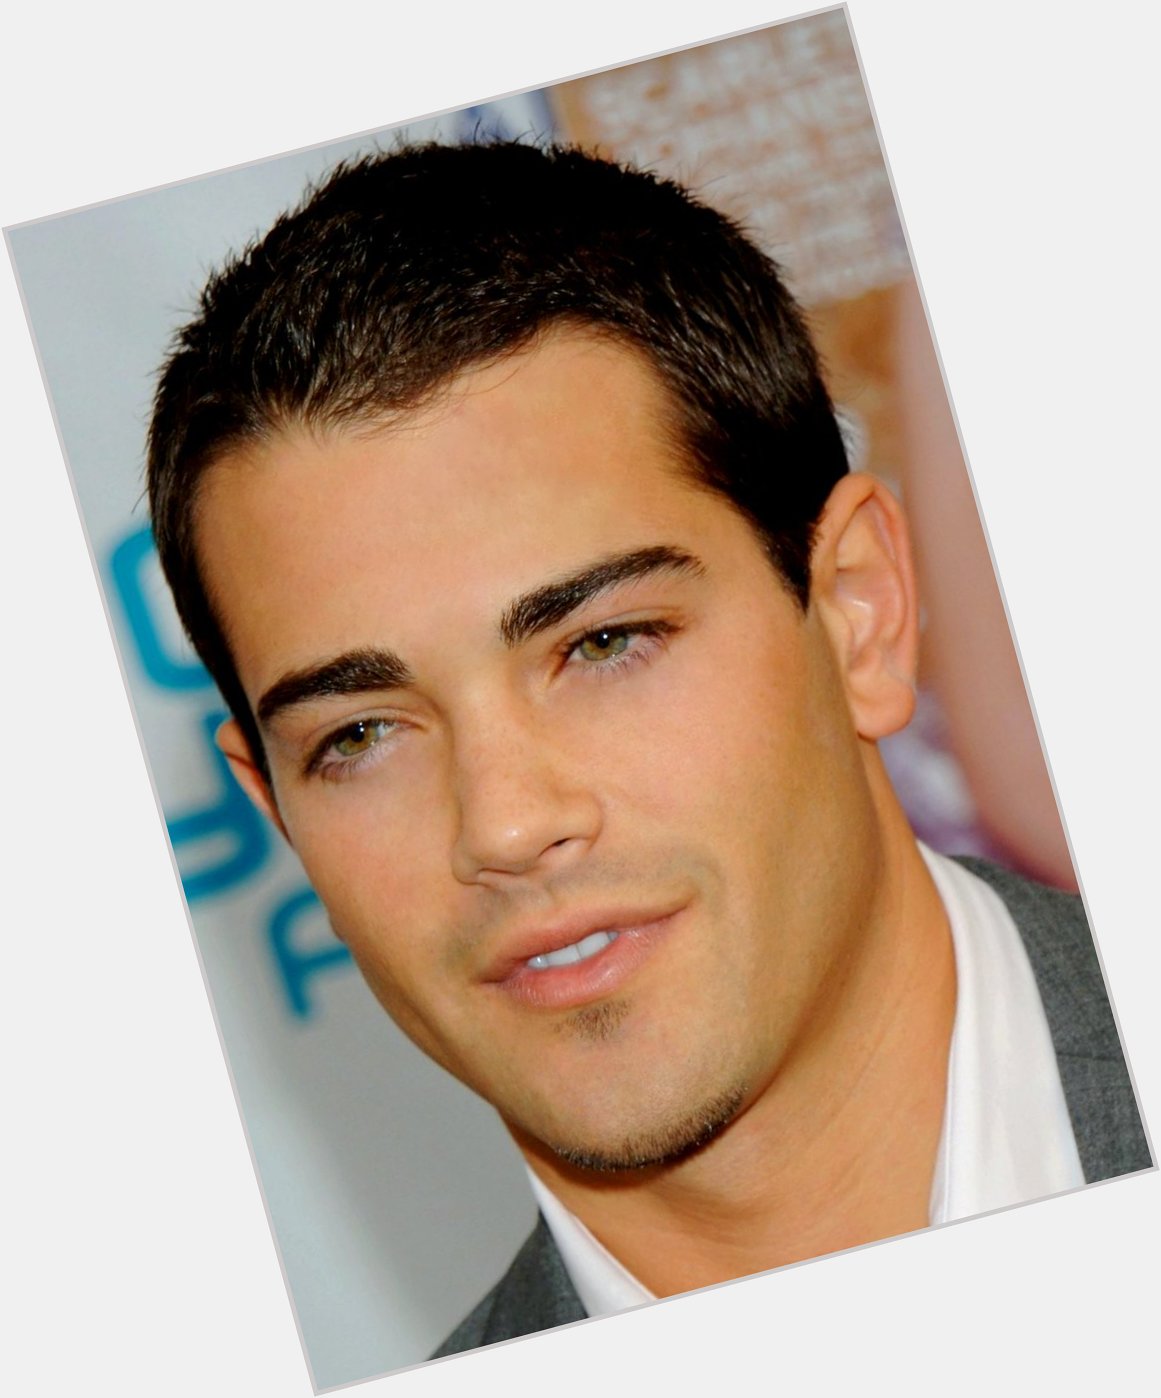 Jesse Metcalfe December 9 Sending Very Happy Birthday Wishes! Continued Success! 